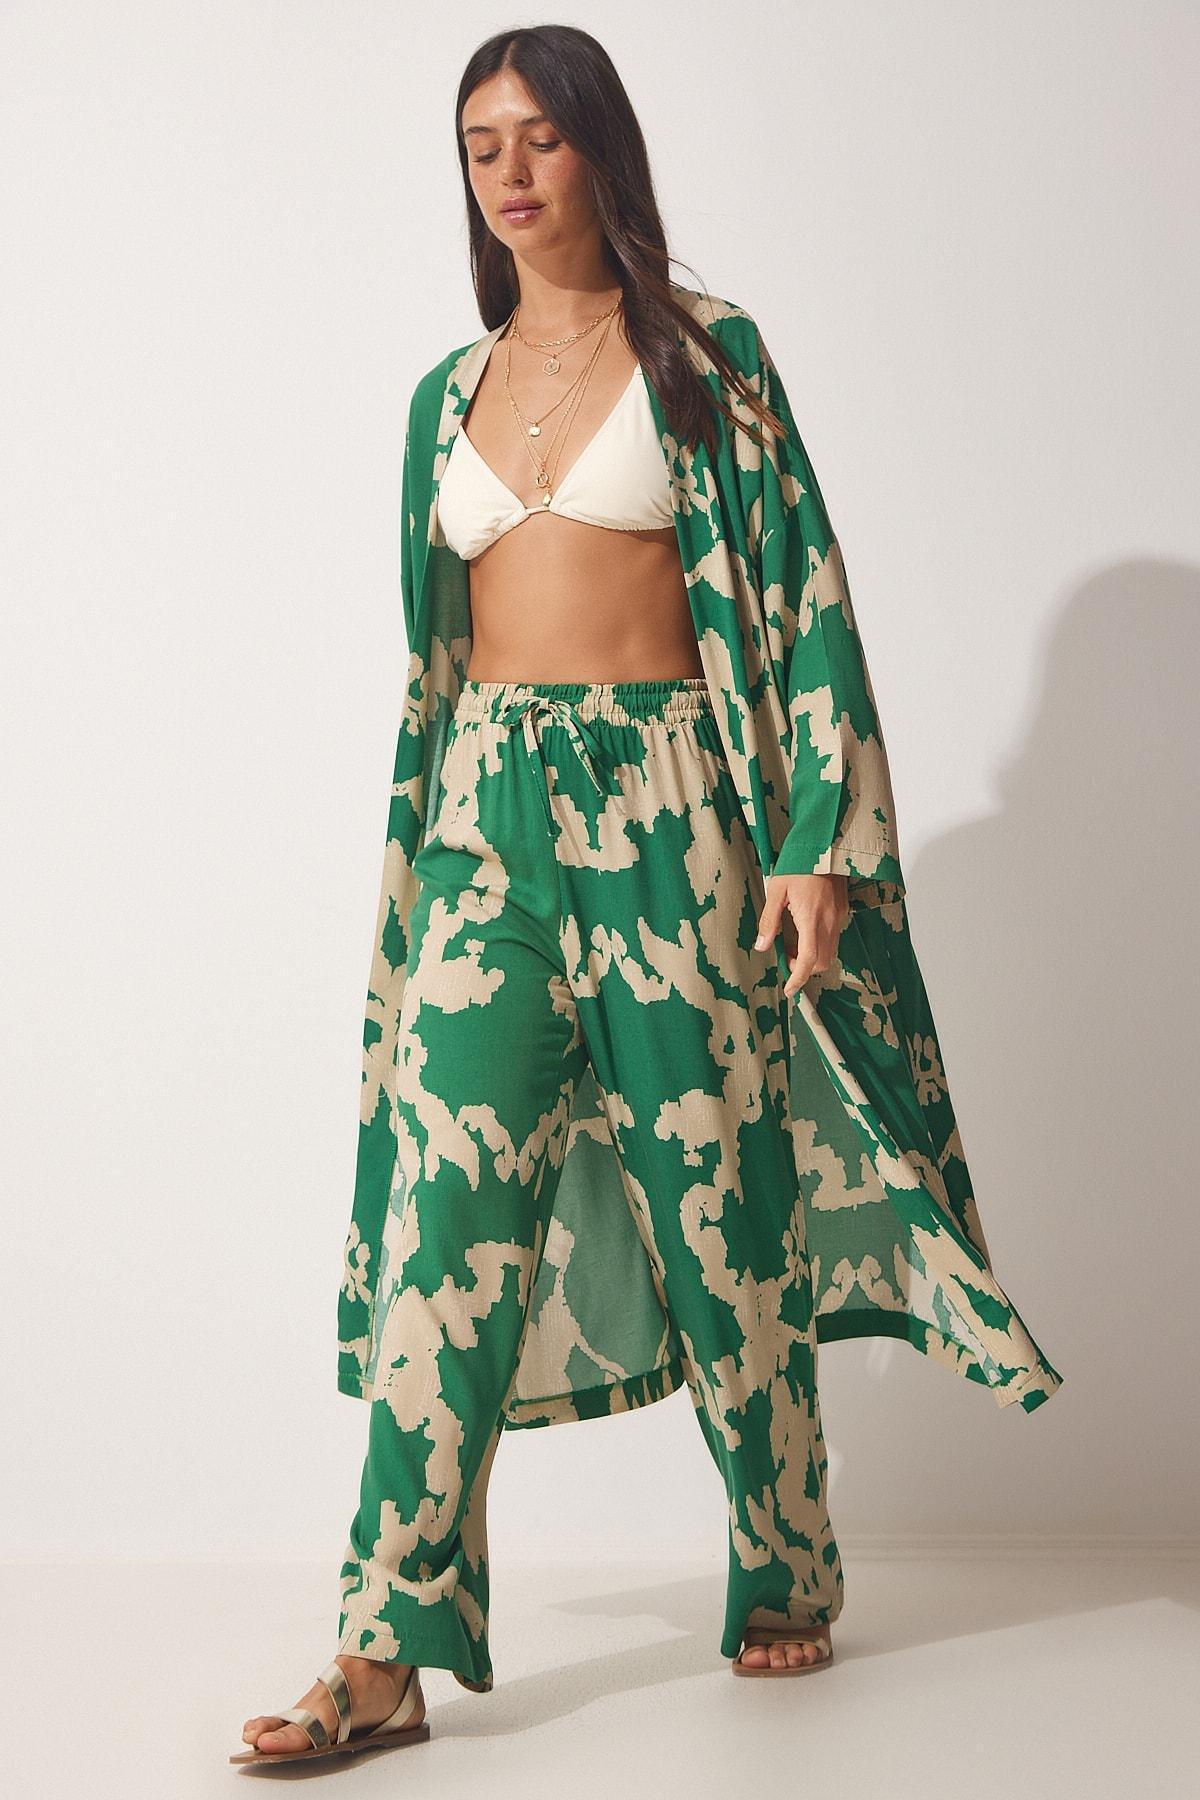 Happiness Istanbul - Green Patterned Kimono Co-Ord Set